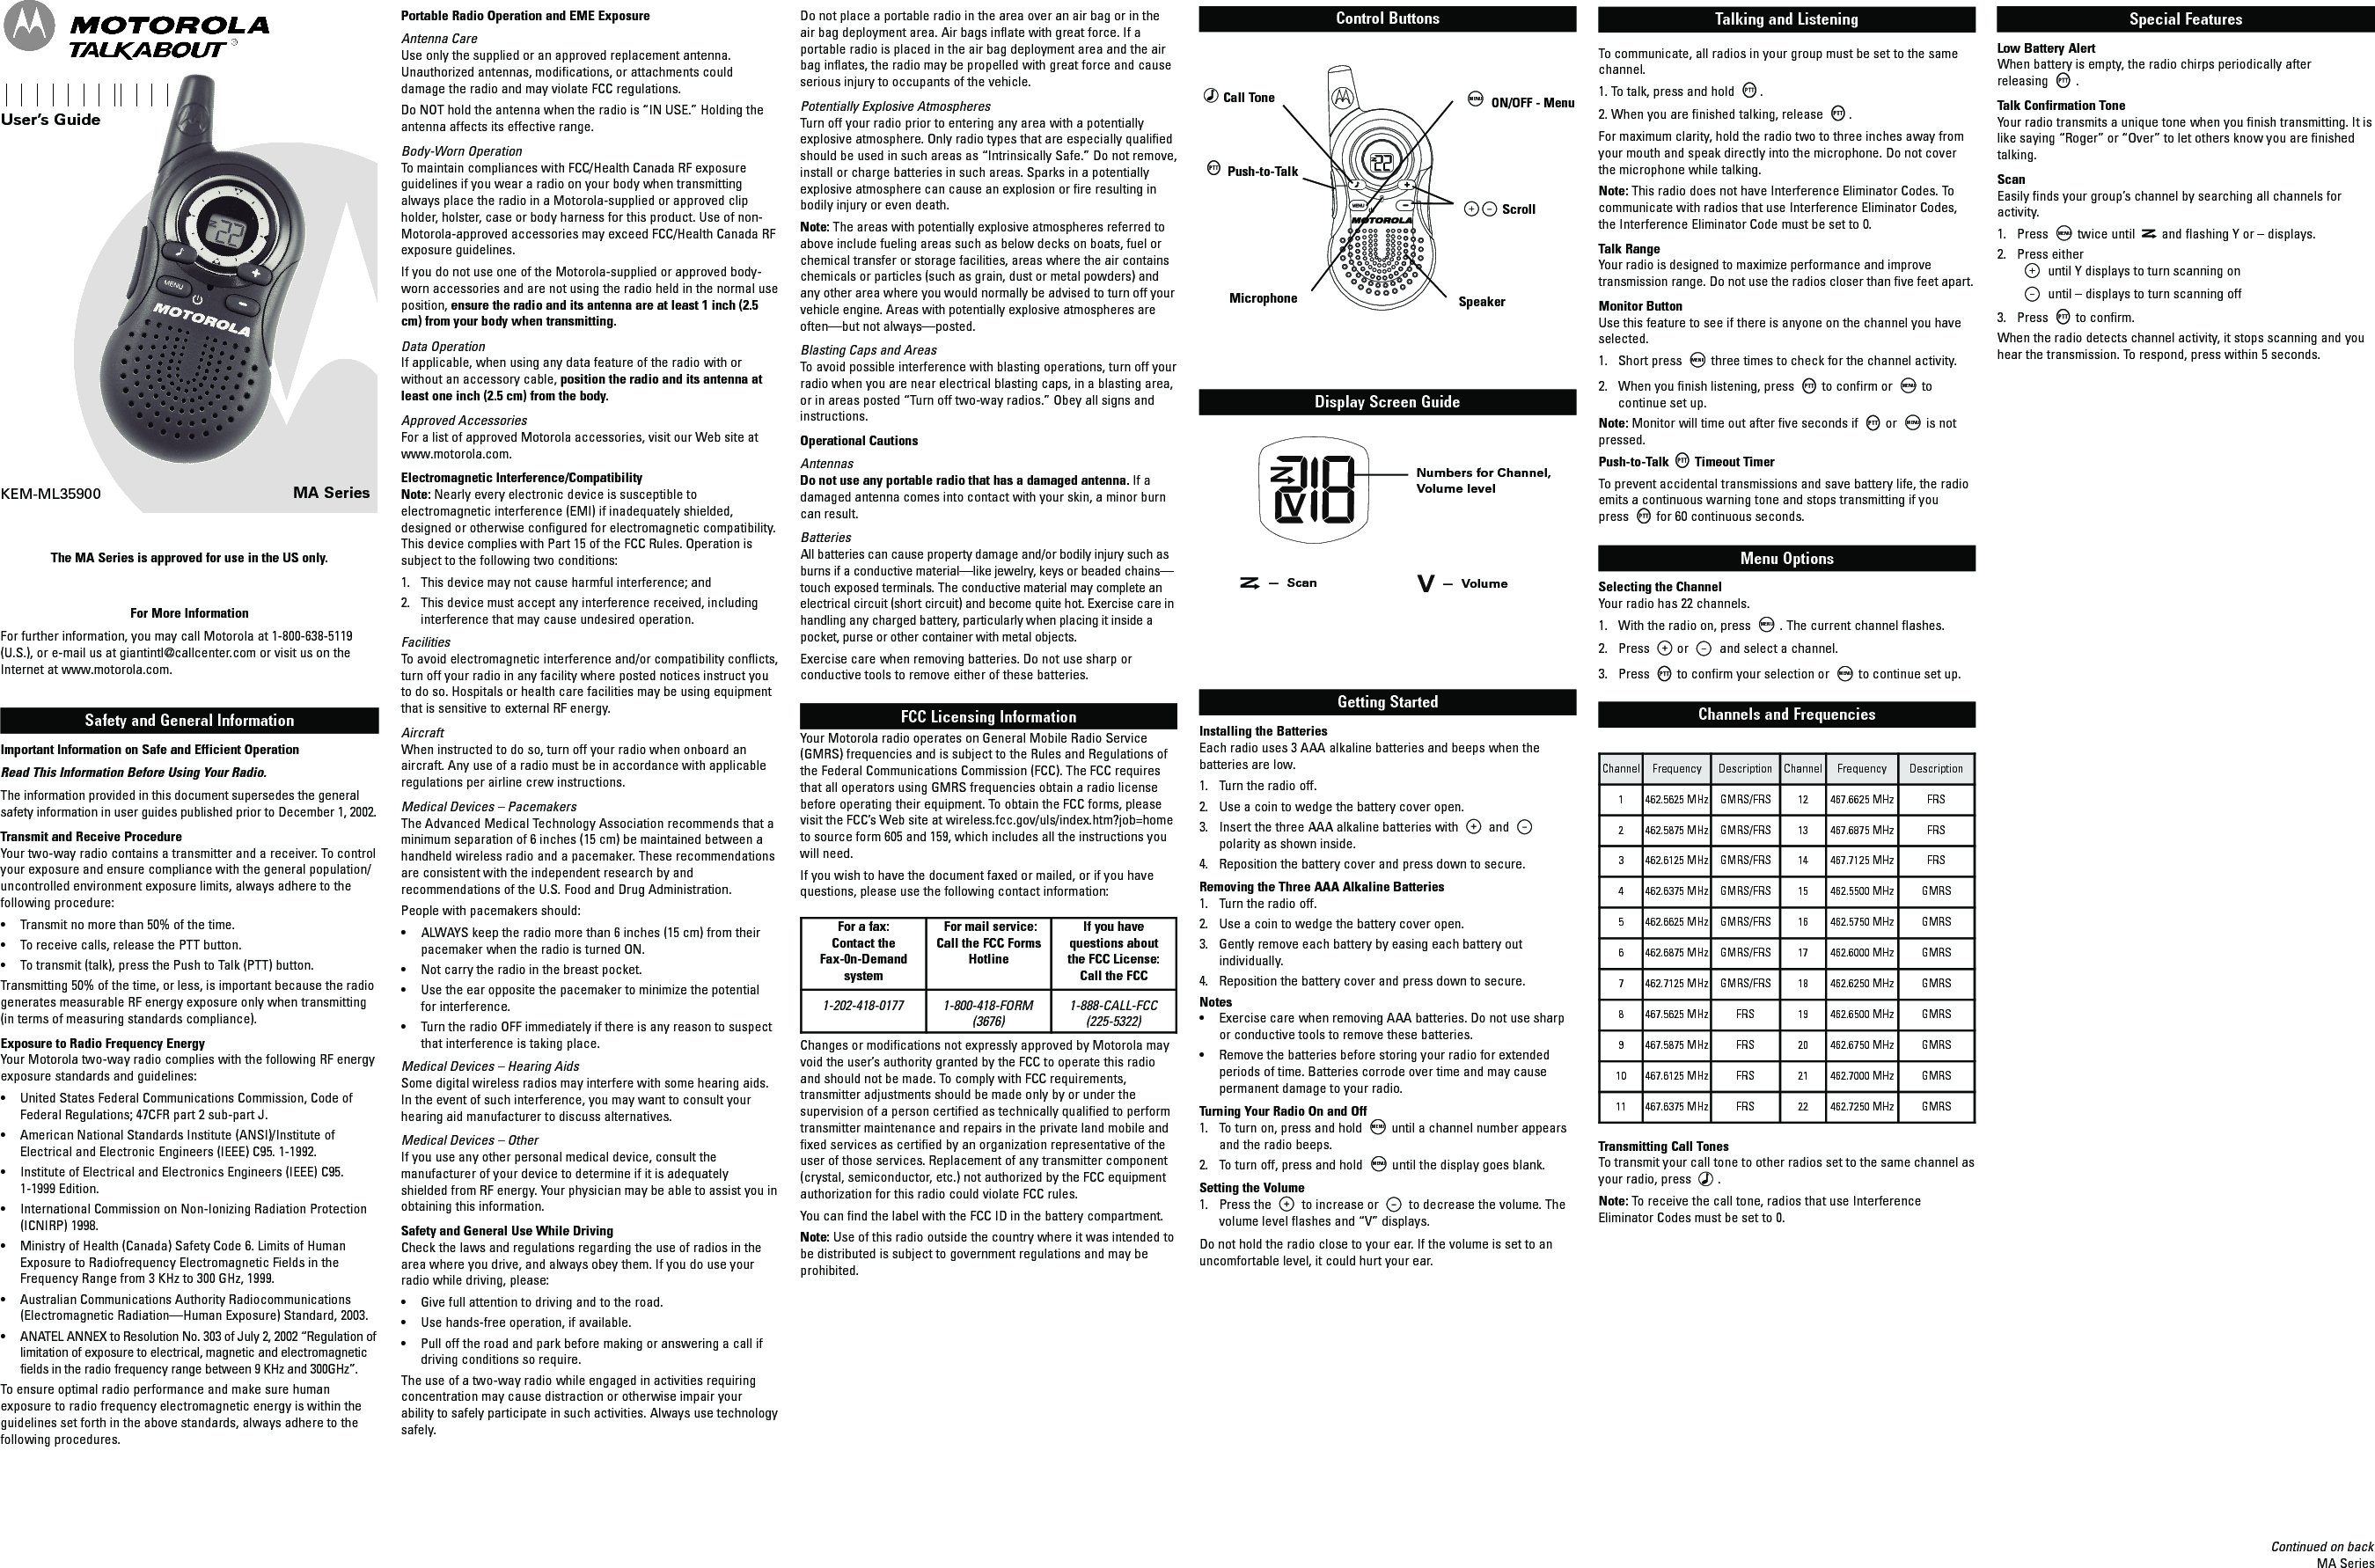 MA SeriesKEM-ML35900Safety and General InformationImportant Information on Safe and Efficient OperationRead This Information Before Using Your Radio.The information provided in this document supersedes the generalsafety information in user guides published prior to December 1, 2002.Transmit and Receive ProcedureYour two-way radio contains a transmitter and a receiver. To controlyour exposure and ensure compliance with the general population/uncontrolled environment exposure limits, always adhere to thefollowing procedure:• Transmit no more than 50% of the time.• To receive calls, release the PTT button.• To transmit (talk), press the Push to Talk (PTT) button.Transmitting 50% of the time, or less, is important because the radiogenerates measurable RF energy exposure only when transmitting(in terms of measuring standards compliance).Exposure to Radio Frequency EnergyYour Motorola two-way radio complies with the following RF energyexposure standards and guidelines:• United States Federal Communications Commission, Code ofFederal Regulations; 47CFR part 2 sub-part J.• American National Standards Institute (ANSI)/Institute ofElectrical and Electronic Engineers (IEEE) C95. 1-1992.• Institute of Electrical and Electronics Engineers (IEEE) C95.1-1999 Edition.• International Commission on Non-Ionizing Radiation Protection(ICNIRP) 1998.• Ministry of Health (Canada) Safety Code 6. Limits of HumanExposure to Radiofrequency Electromagnetic Fields in theFrequency Range from 3 KHz to 300 GHz, 1999.• Australian Communications Authority Radiocommunications(Electromagnetic Radiation—Human Exposure) Standard, 2003.• ANATEL ANNEX to Resolution No. 303 of July 2, 2002 “Regulation oflimitation of exposure to electrical, magnetic and electromagneticfields in the radio frequency range between 9 KHz and 300GHz”.To ensure optimal radio performance and make sure humanexposure to radio frequency electromagnetic energy is within theguidelines set forth in the above standards, always adhere to thefollowing procedures.Portable Radio Operation and EME ExposureAntenna CareUse only the supplied or an approved replacement antenna.Unauthorized antennas, modifications, or attachments coulddamage the radio and may violate FCC regulations.Do NOT hold the antenna when the radio is “IN USE.” Holding theantenna affects its effective range.Body-Worn OperationTo maintain compliances with FCC/Health Canada RF exposureguidelines if you wear a radio on your body when transmittingalways place the radio in a Motorola-supplied or approved clipholder, holster, case or body harness for this product. Use of non-Motorola-approved accessories may exceed FCC/Health Canada RFexposure guidelines.If you do not use one of the Motorola-supplied or approved body-worn accessories and are not using the radio held in the normal useposition, ensure the radio and its antenna are at least 1 inch (2.5cm) from your body when transmitting.Data OperationIf applicable, when using any data feature of the radio with orwithout an accessory cable, position the radio and its antenna atleast one inch (2.5 cm) from the body.Approved AccessoriesFor a list of approved Motorola accessories, visit our Web site atwww.motorola.com.Electromagnetic Interference/CompatibilityNote: Nearly every electronic device is susceptible toelectromagnetic interference (EMI) if inadequately shielded,designed or otherwise configured for electromagnetic compatibility.This device complies with Part 15 of the FCC Rules. Operation issubject to the following two conditions:1. This device may not cause harmful interference; and2. This device must accept any interference received, includinginterference that may cause undesired operation.FacilitiesTo avoid electromagnetic interference and/or compatibility conflicts,turn off your radio in any facility where posted notices instruct youto do so. Hospitals or health care facilities may be using equipmentthat is sensitive to external RF energy.AircraftWhen instructed to do so, turn off your radio when onboard anaircraft. Any use of a radio must be in accordance with applicableregulations per airline crew instructions.Medical Devices – PacemakersThe Advanced Medical Technology Association recommends that aminimum separation of 6 inches (15 cm) be maintained between ahandheld wireless radio and a pacemaker. These recommendationsare consistent with the independent research by andrecommendations of the U.S. Food and Drug Administration.People with pacemakers should:• ALWAYS keep the radio more than 6 inches (15 cm) from theirpacemaker when the radio is turned ON.• Not carry the radio in the breast pocket.• Use the ear opposite the pacemaker to minimize the potentialfor interference.• Turn the radio OFF immediately if there is any reason to suspectthat interference is taking place.Medical Devices – Hearing AidsSome digital wireless radios may interfere with some hearing aids.In the event of such interference, you may want to consult yourhearing aid manufacturer to discuss alternatives.Medical Devices – OtherIf you use any other personal medical device, consult themanufacturer of your device to determine if it is adequatelyshielded from RF energy. Your physician may be able to assist you inobtaining this information.Safety and General Use While DrivingCheck the laws and regulations regarding the use of radios in thearea where you drive, and always obey them. If you do use yourradio while driving, please:• Give full attention to driving and to the road.• Use hands-free operation, if available.• Pull off the road and park before making or answering a call ifdriving conditions so require.The use of a two-way radio while engaged in activities requiringconcentration may cause distraction or otherwise impair yourability to safely participate in such activities. Always use technologysafely.For More InformationFor further information, you may call Motorola at 1-800-638-5119(U.S.), or e-mail us at giantintl@callcenter.com or visit us on theInternet at www.motorola.com.Do not place a portable radio in the area over an air bag or in theair bag deployment area. Air bags inflate with great force. If aportable radio is placed in the air bag deployment area and the airbag inflates, the radio may be propelled with great force and causeserious injury to occupants of the vehicle.Potentially Explosive AtmospheresTurn off your radio prior to entering any area with a potentiallyexplosive atmosphere. Only radio types that are especially qualifiedshould be used in such areas as “Intrinsically Safe.” Do not remove,install or charge batteries in such areas. Sparks in a potentiallyexplosive atmosphere can cause an explosion or fire resulting inbodily injury or even death.Note: The areas with potentially explosive atmospheres referred toabove include fueling areas such as below decks on boats, fuel orchemical transfer or storage facilities, areas where the air containschemicals or particles (such as grain, dust or metal powders) andany other area where you would normally be advised to turn off yourvehicle engine. Areas with potentially explosive atmospheres areoften—but not always—posted.Blasting Caps and AreasTo avoid possible interference with blasting operations, turn off yourradio when you are near electrical blasting caps, in a blasting area,or in areas posted “Turn off two-way radios.” Obey all signs andinstructions.Operational CautionsAntennasDo not use any portable radio that has a damaged antenna. If adamaged antenna comes into contact with your skin, a minor burncan result.BatteriesAll batteries can cause property damage and/or bodily injury such asburns if a conductive material—like jewelry, keys or beaded chains—touch exposed terminals. The conductive material may complete anelectrical circuit (short circuit) and become quite hot. Exercise care inhandling any charged battery, particularly when placing it inside apocket, purse or other container with metal objects.Exercise care when removing batteries. Do not use sharp orconductive tools to remove either of these batteries.FCC Licensing InformationYour Motorola radio operates on General Mobile Radio Service(GMRS) frequencies and is subject to the Rules and Regulations ofthe Federal Communications Commission (FCC). The FCC requiresthat all operators using GMRS frequencies obtain a radio licensebefore operating their equipment. To obtain the FCC forms, pleasevisit the FCC’s Web site at wireless.fcc.gov/uls/index.htm?job=hometo source form 605 and 159, which includes all the instructions youwill need.If you wish to have the document faxed or mailed, or if you havequestions, please use the following contact information:Changes or modifications not expressly approved by Motorola mayvoid the user’s authority granted by the FCC to operate this radioand should not be made. To comply with FCC requirements,transmitter adjustments should be made only by or under thesupervision of a person certified as technically qualified to performtransmitter maintenance and repairs in the private land mobile andfixed services as certified by an organization representative of theuser of those services. Replacement of any transmitter component(crystal, semiconductor, etc.) not authorized by the FCC equipmentauthorization for this radio could violate FCC rules.You can find the label with the FCC ID in the battery compartment.Note: Use of this radio outside the country where it was intended tobe distributed is subject to government regulations and may beprohibited.®User’s GuideTalking and ListeningTo communicate, all radios in your group must be set to the samechannel.1. To talk, press and hold .2. When you are finished talking, release .For maximum clarity, hold the radio two to three inches away fromyour mouth and speak directly into the microphone. Do not coverthe microphone while talking.Note: This radio does not have Interference Eliminator Codes. Tocommunicate with radios that use Interference Eliminator Codes,the Interference Eliminator Code must be set to 0.Talk RangeYour radio is designed to maximize performance and improvetransmission range. Do not use the radios closer than five feet apart.Monitor ButtonUse this feature to see if there is anyone on the channel you haveselected.1. Short press three times to check for the channel activity.2. When you finish listening, press to confirm or tocontinue set up.Note: Monitor will time out after five seconds if or is notpressed.Push-to-Talk Timeout TimerTo prevent accidental transmissions and save battery life, the radioemits a continuous warning tone and stops transmitting if youpress for 60 continuous seconds.Menu OptionsSelecting the ChannelYour radio has 22 channels.1. With the radio on, press . The current channel flashes.2. Press or and select a channel.3. Press to confirm your selection or to continue set up.Channels and FrequenciesTransmitting Call TonesTo transmit your call tone to other radios set to the same channel asyour radio, press .Note: To receive the call tone, radios that use InterferenceEliminator Codes must be set to 0.MENU MENU MENU MENU MENU Special FeaturesLow Battery AlertWhen battery is empty, the radio chirps periodically afterreleasing .Talk Confirmation ToneYour radio transmits a unique tone when you finish transmitting. It islike saying “Roger” or “Over” to let others know you are finishedtalking.ScanEasily finds your group’s channel by searching all channels foractivity.1. Press twice until and flashing Y or – displays.2. Press eitheruntil Y displays to turn scanning onuntil – displays to turn scanning off3. Press to confirm.When the radio detects channel activity, it stops scanning and youhear the transmission. To respond, press within 5 seconds.MENU Display Screen GuideNumbers for Channel,Volume level—Scan —VolumeContinued on backMA SeriesControl ButtonsCall TonePush-to-TalkMicrophoneON/OFF - MenuScrollSpeakerMENU Getting StartedInstalling the BatteriesEach radio uses 3 AAA alkaline batteries and beeps when thebatteries are low.1. Turn the radio off.2. Use a coin to wedge the battery cover open.3. Insert the three AAA alkaline batteries with andpolarity as shown inside.4. Reposition the battery cover and press down to secure.Removing the Three AAA Alkaline Batteries1. Turn the radio off.2. Use a coin to wedge the battery cover open.3. Gently remove each battery by easing each battery outindividually.4. Reposition the battery cover and press down to secure.Notes• Exercise care when removing AAA batteries. Do not use sharpor conductive tools to remove these batteries.• Remove the batteries before storing your radio for extendedperiods of time. Batteries corrode over time and may causepermanent damage to your radio.Turning Your Radio On and Off1. To turn on, press and hold until a channel number appearsand the radio beeps.2. To turn off, press and hold until the display goes blank.Setting the Volume1. Press the to increase or to decrease the volume. Thevolume level flashes and “V” displays.Do not hold the radio close to your ear. If the volume is set to anuncomfortable level, it could hurt your ear.MENU MENU For a fax:Contact theFax-0n-DemandsystemFor mail service:Call the FCC FormsHotlineIf you havequestions aboutthe FCC License:Call the FCC1-202-418-0177 1-800-418-FORM(3676)1-888-CALL-FCC(225-5322)Channel Frequency Description Channel Frequency Description1 462.5625 MHz GMRS/FRS 12 467.6625 MHz FRS2 462.5875 MHz GMRS/FRS 13467.6875 MHz FRS3 462.6125 MHz GMRS/FRS 14467.7125 MHz FRS4 462.6375 MHz GMRS/FRS 15 462.5500 MHz GMRS5 462.6625 MHz GMRS/FRS 16 462.5750 MHz GMRS6 462.6875 MHz GMRS/FRS 17 462.6000 MHz GMRS7 462.7125 MHz GMRS/FRS 18 462.6250 MHz GMRS8 467.5625 MHz FRS 19 462.6500 MHz GMRS9 467.5875 MHz FRS 20 462.6750 MHz GMRS10 467.6125 MHz FRS 21 462.7000 MHz GMRS11 467.6375 MHz FRS 22 462.7250 MHz GMRSThe MA Series is approved for use in the US only.